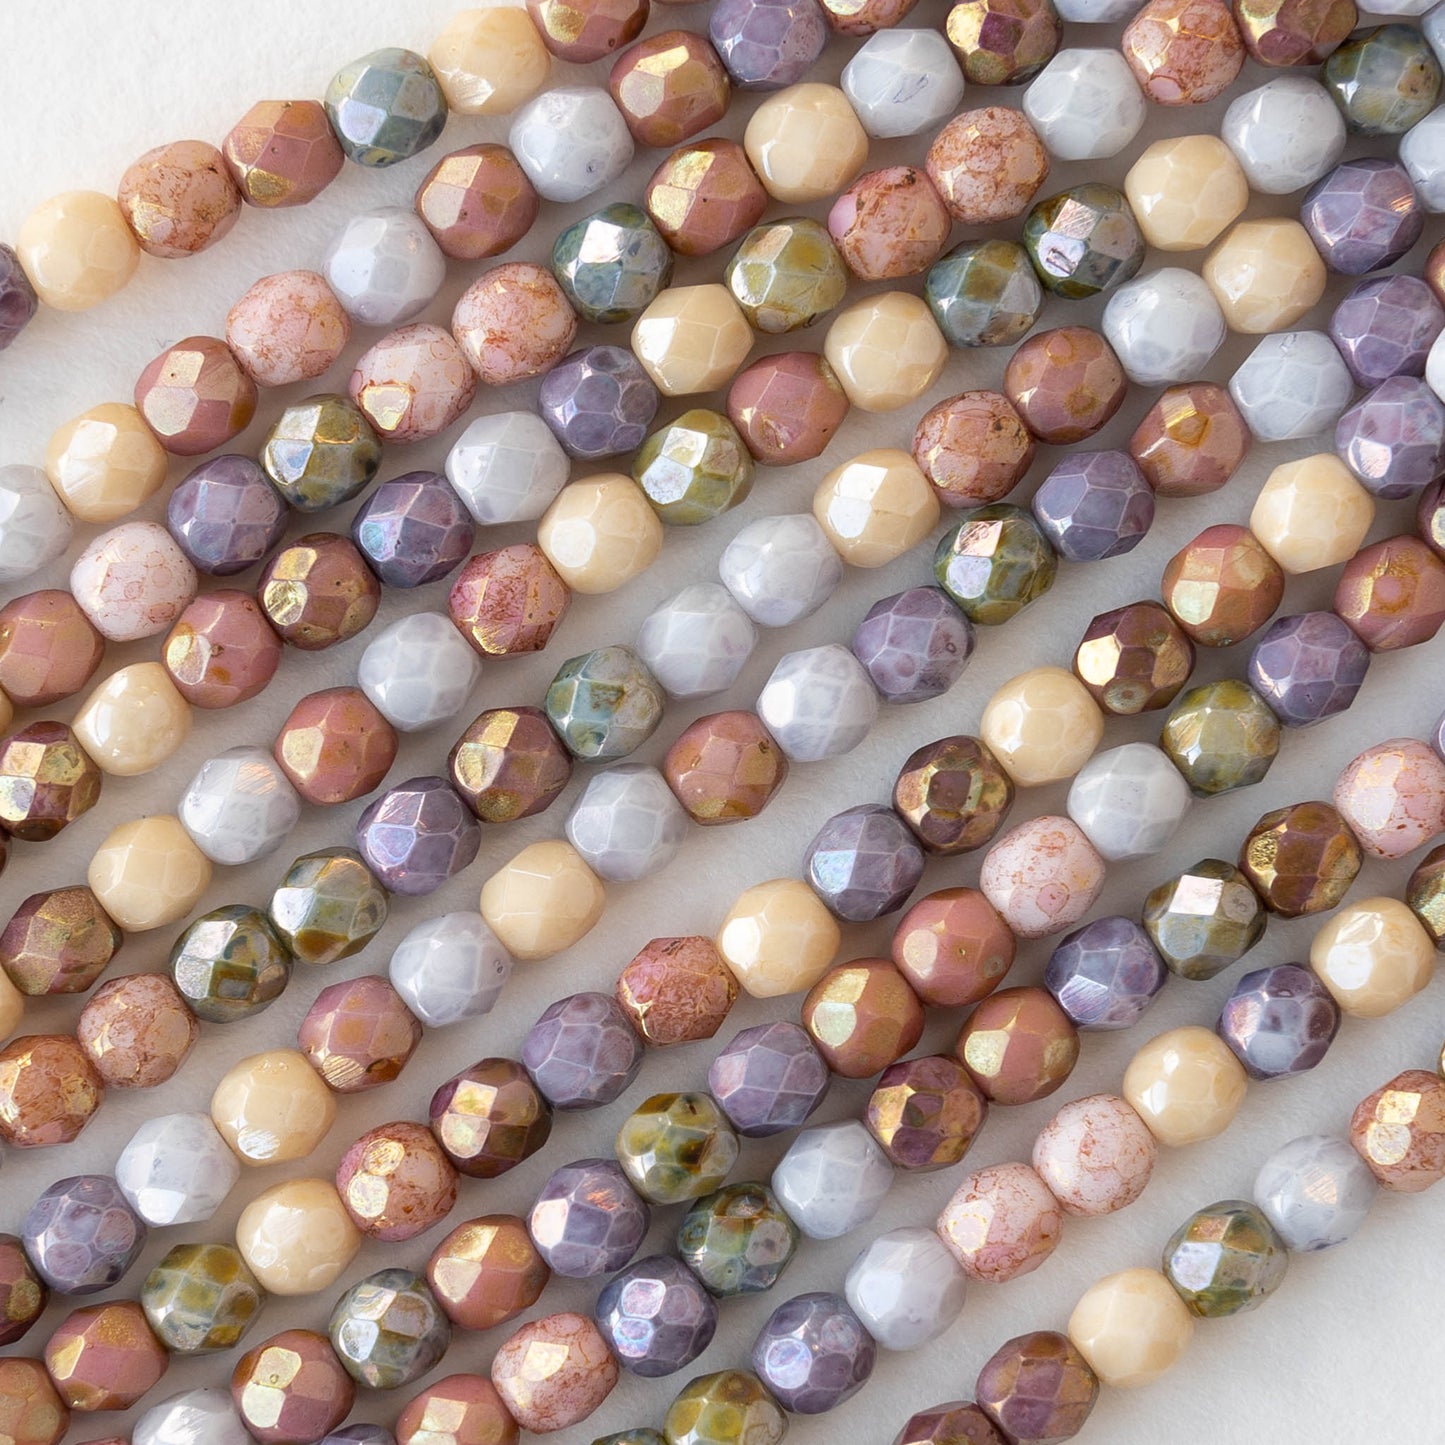 Load image into Gallery viewer, 4mm Round Firepolished Beads - Opaque Lustered Picasso Mix - 50 beads
